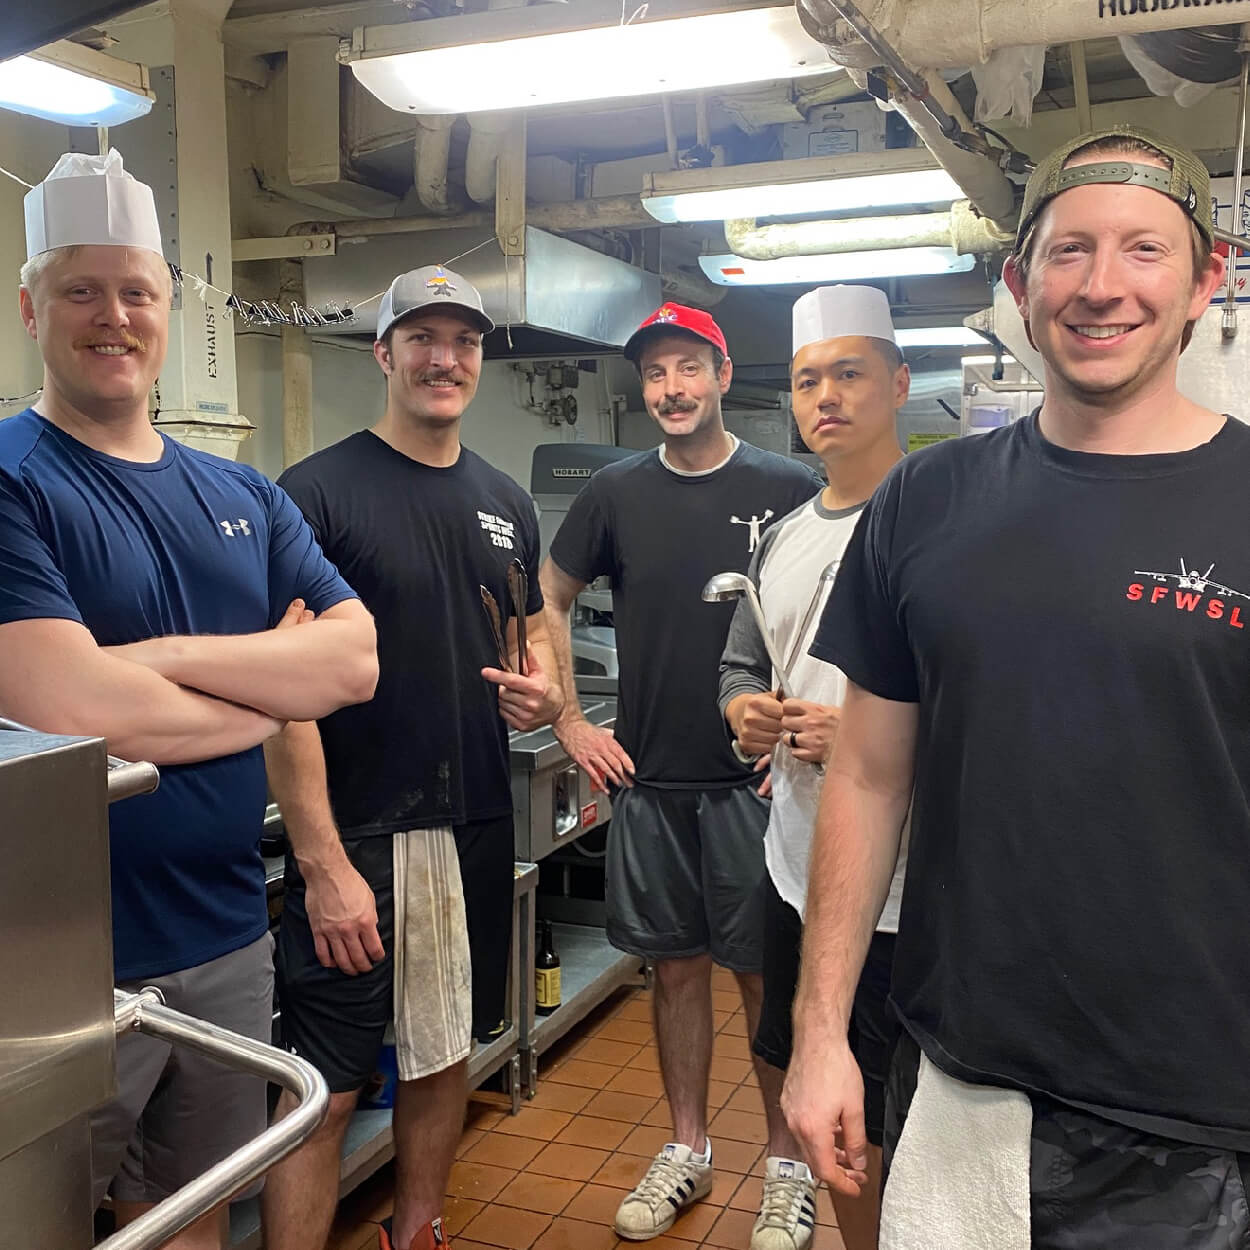 Hangar Bay Spice founder, BIFF and friends in a kitchen cooking on deployment